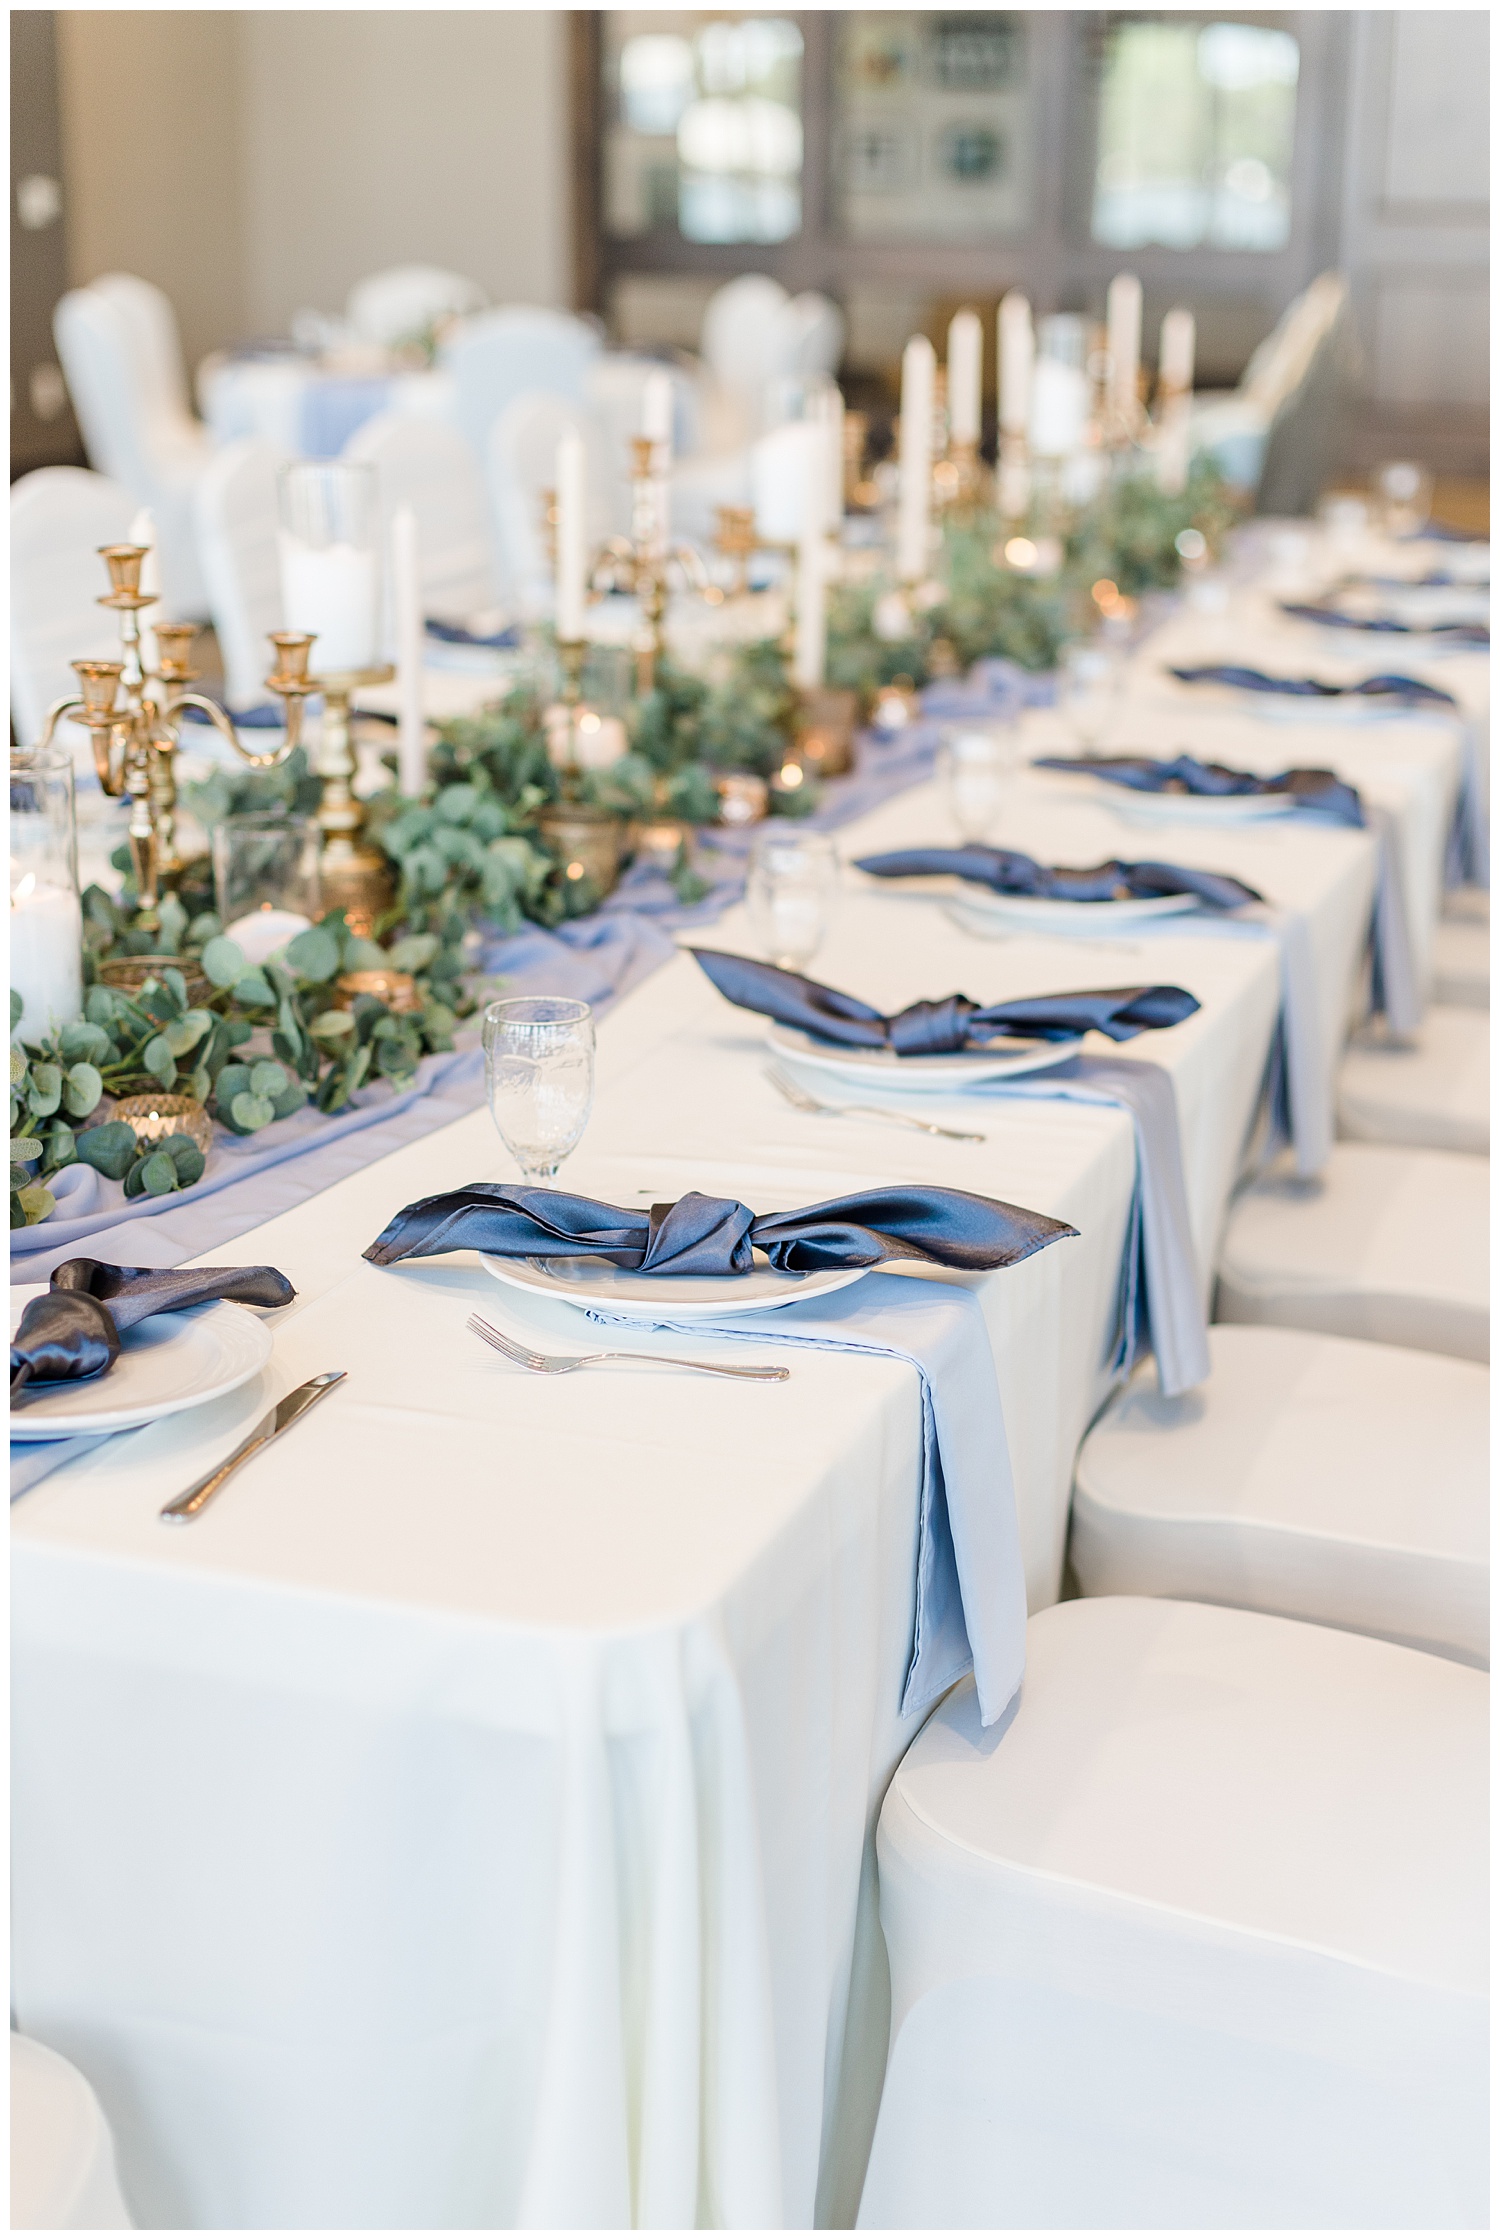 Dusty blue and peach kings wedding table topped with gold vintage candlesticks, eucalyptus and knotted napkins at the Shores at Five Island | CB Studio